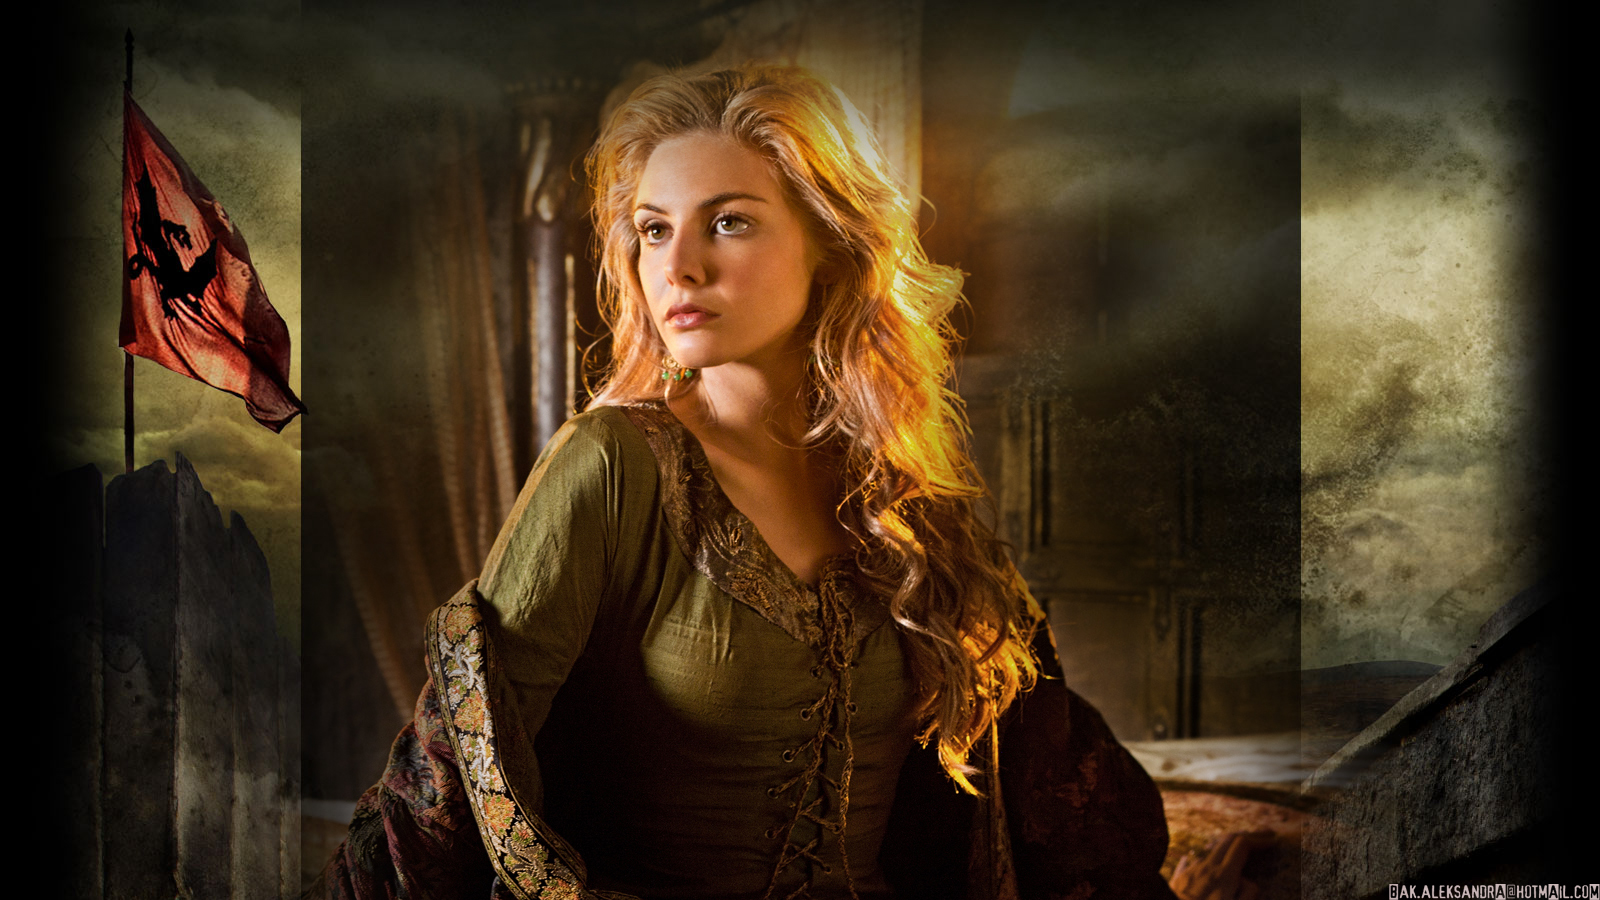 Tamsin Egerton as Guinevere in Camelot (TV Series, 2011 